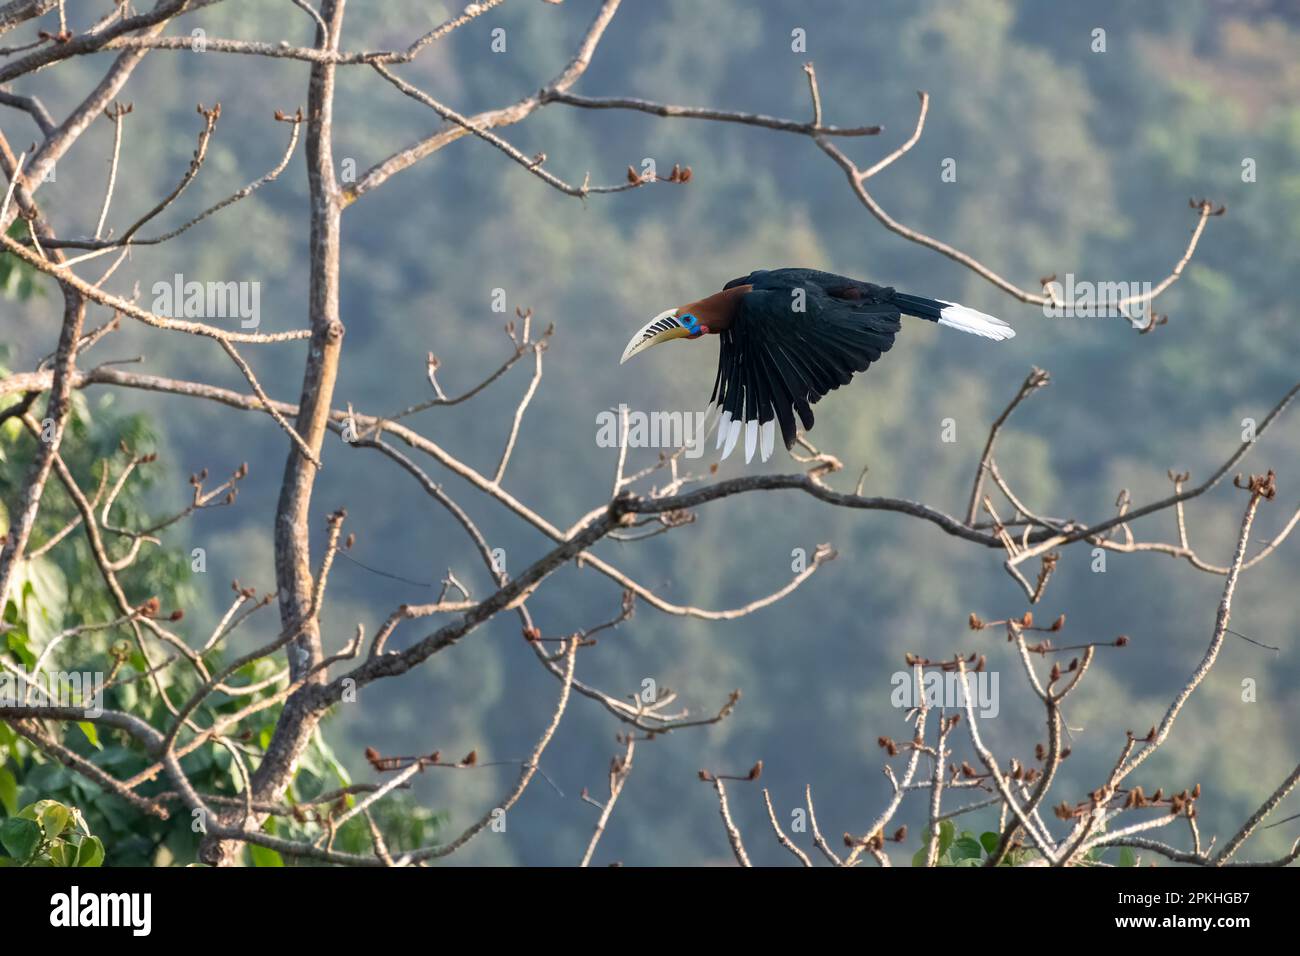 A male rufous-necked hornbill (Aceros nipalensis) observed in Latpanchar in West Bengal, India Stock Photo